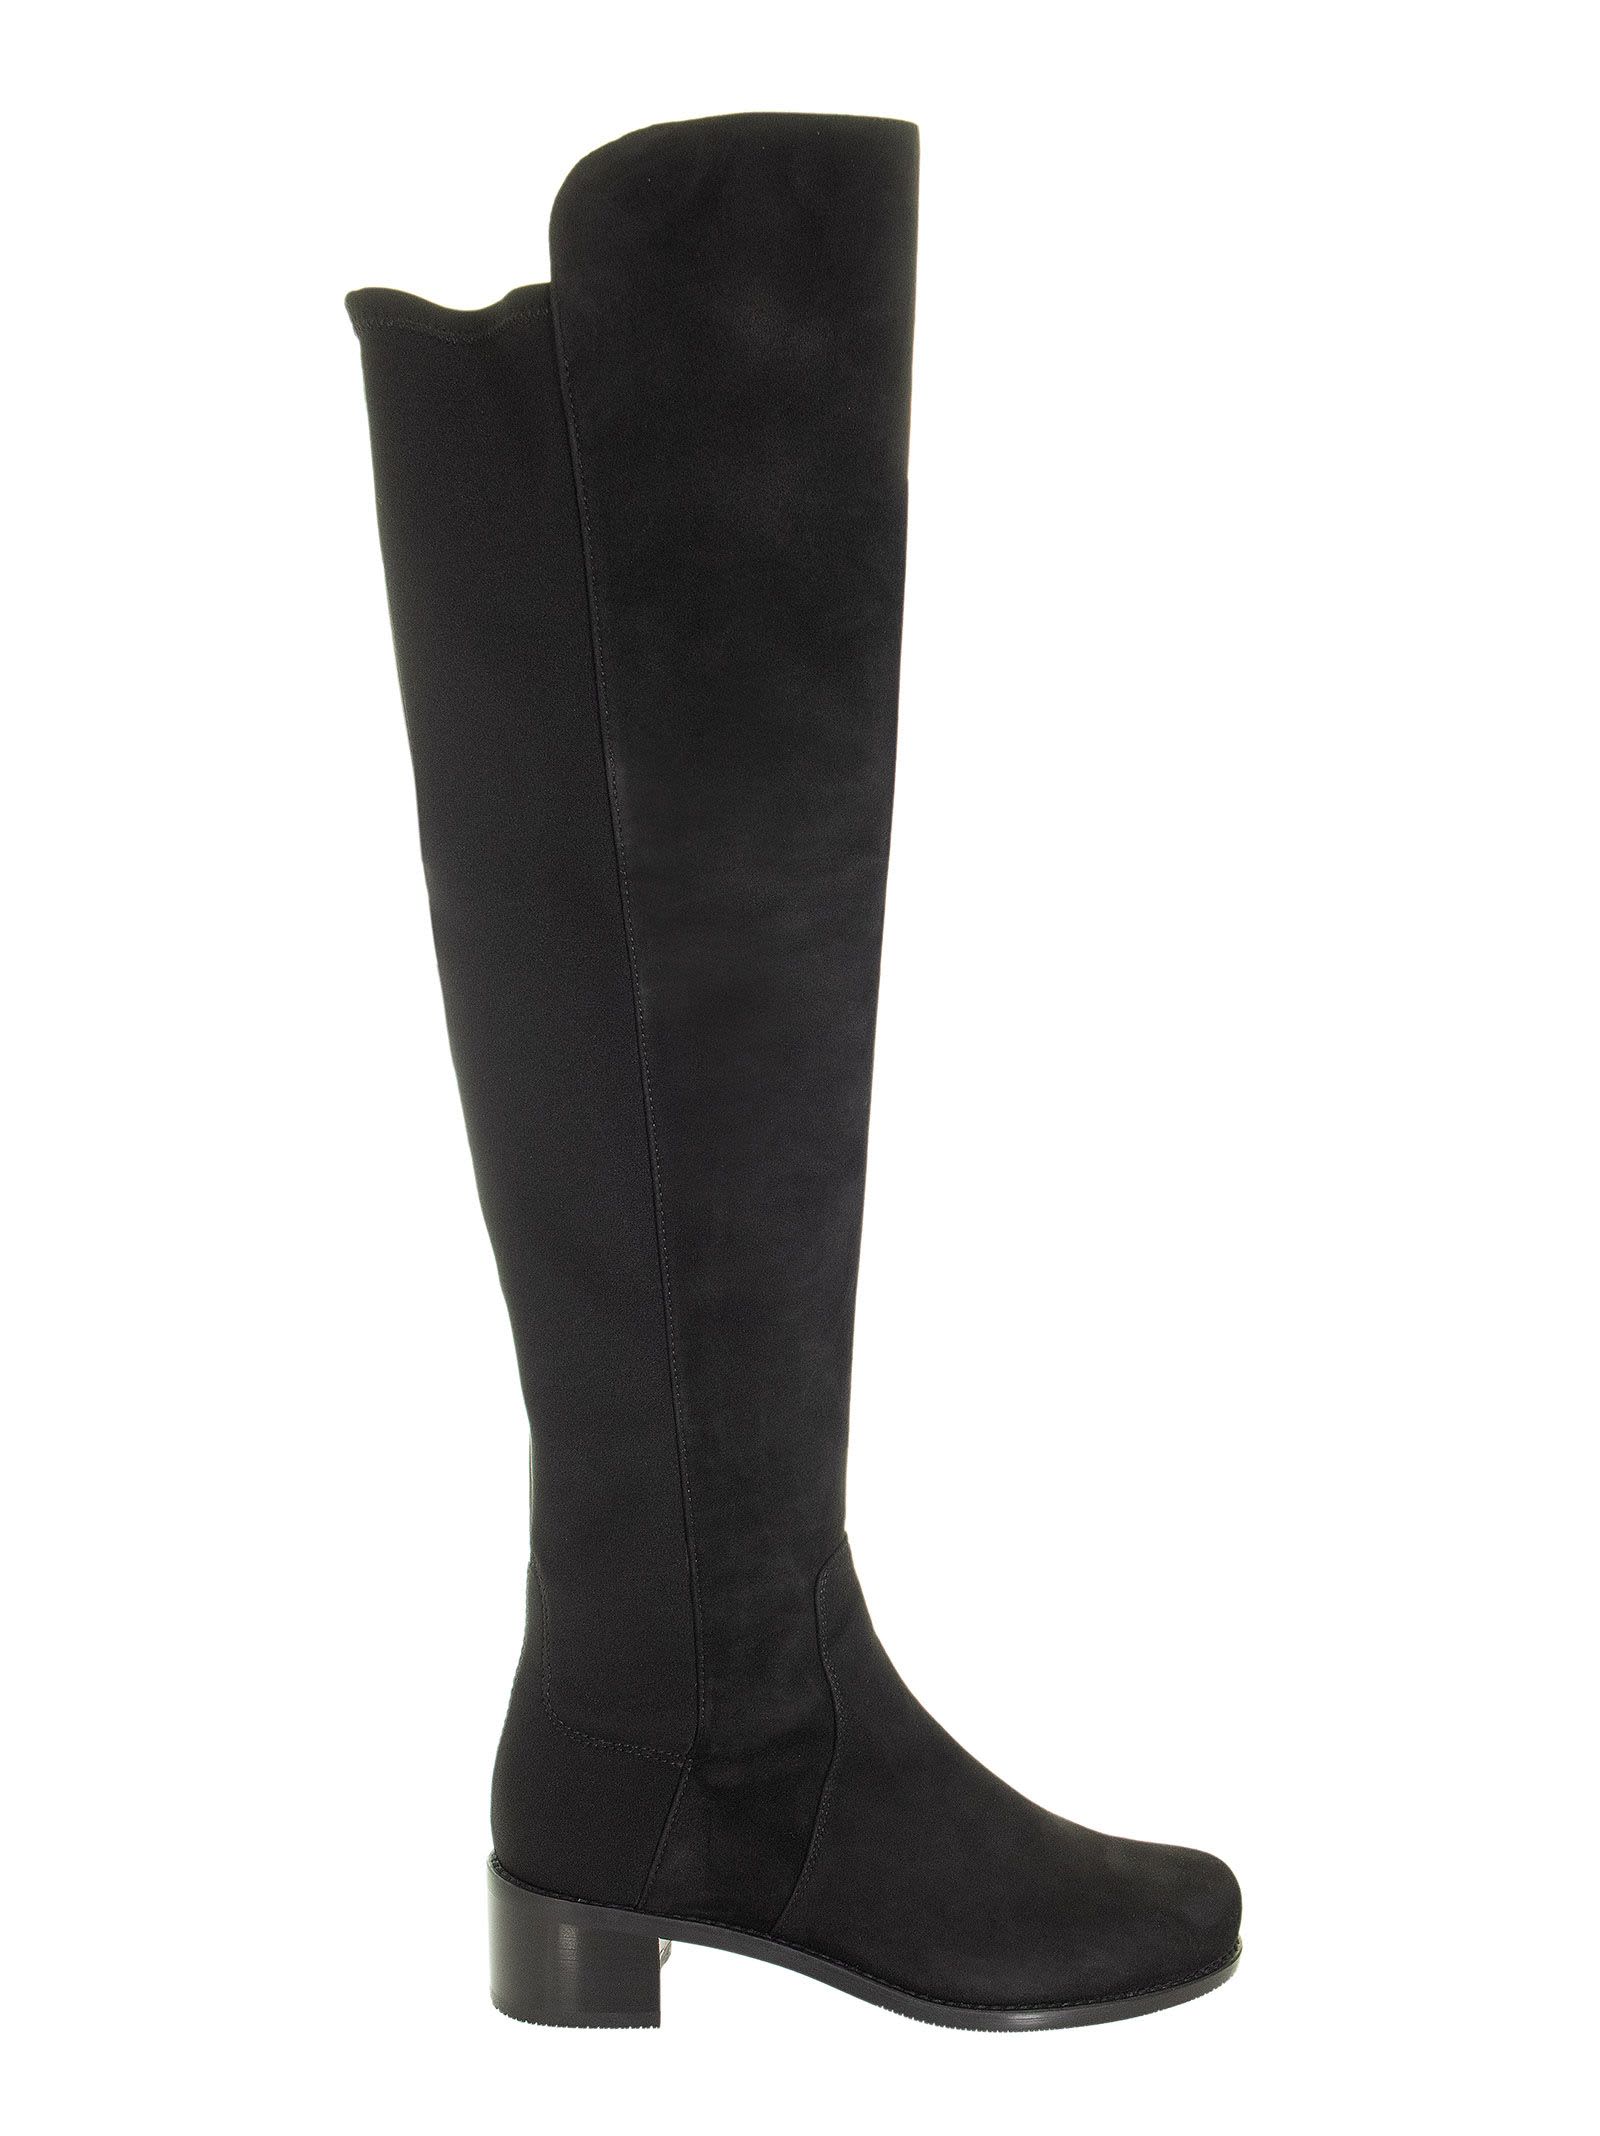 Buy Stuart Weitzman Reserve - Suede Over-the-knee Boot online, shop Stuart Weitzman shoes with free shipping